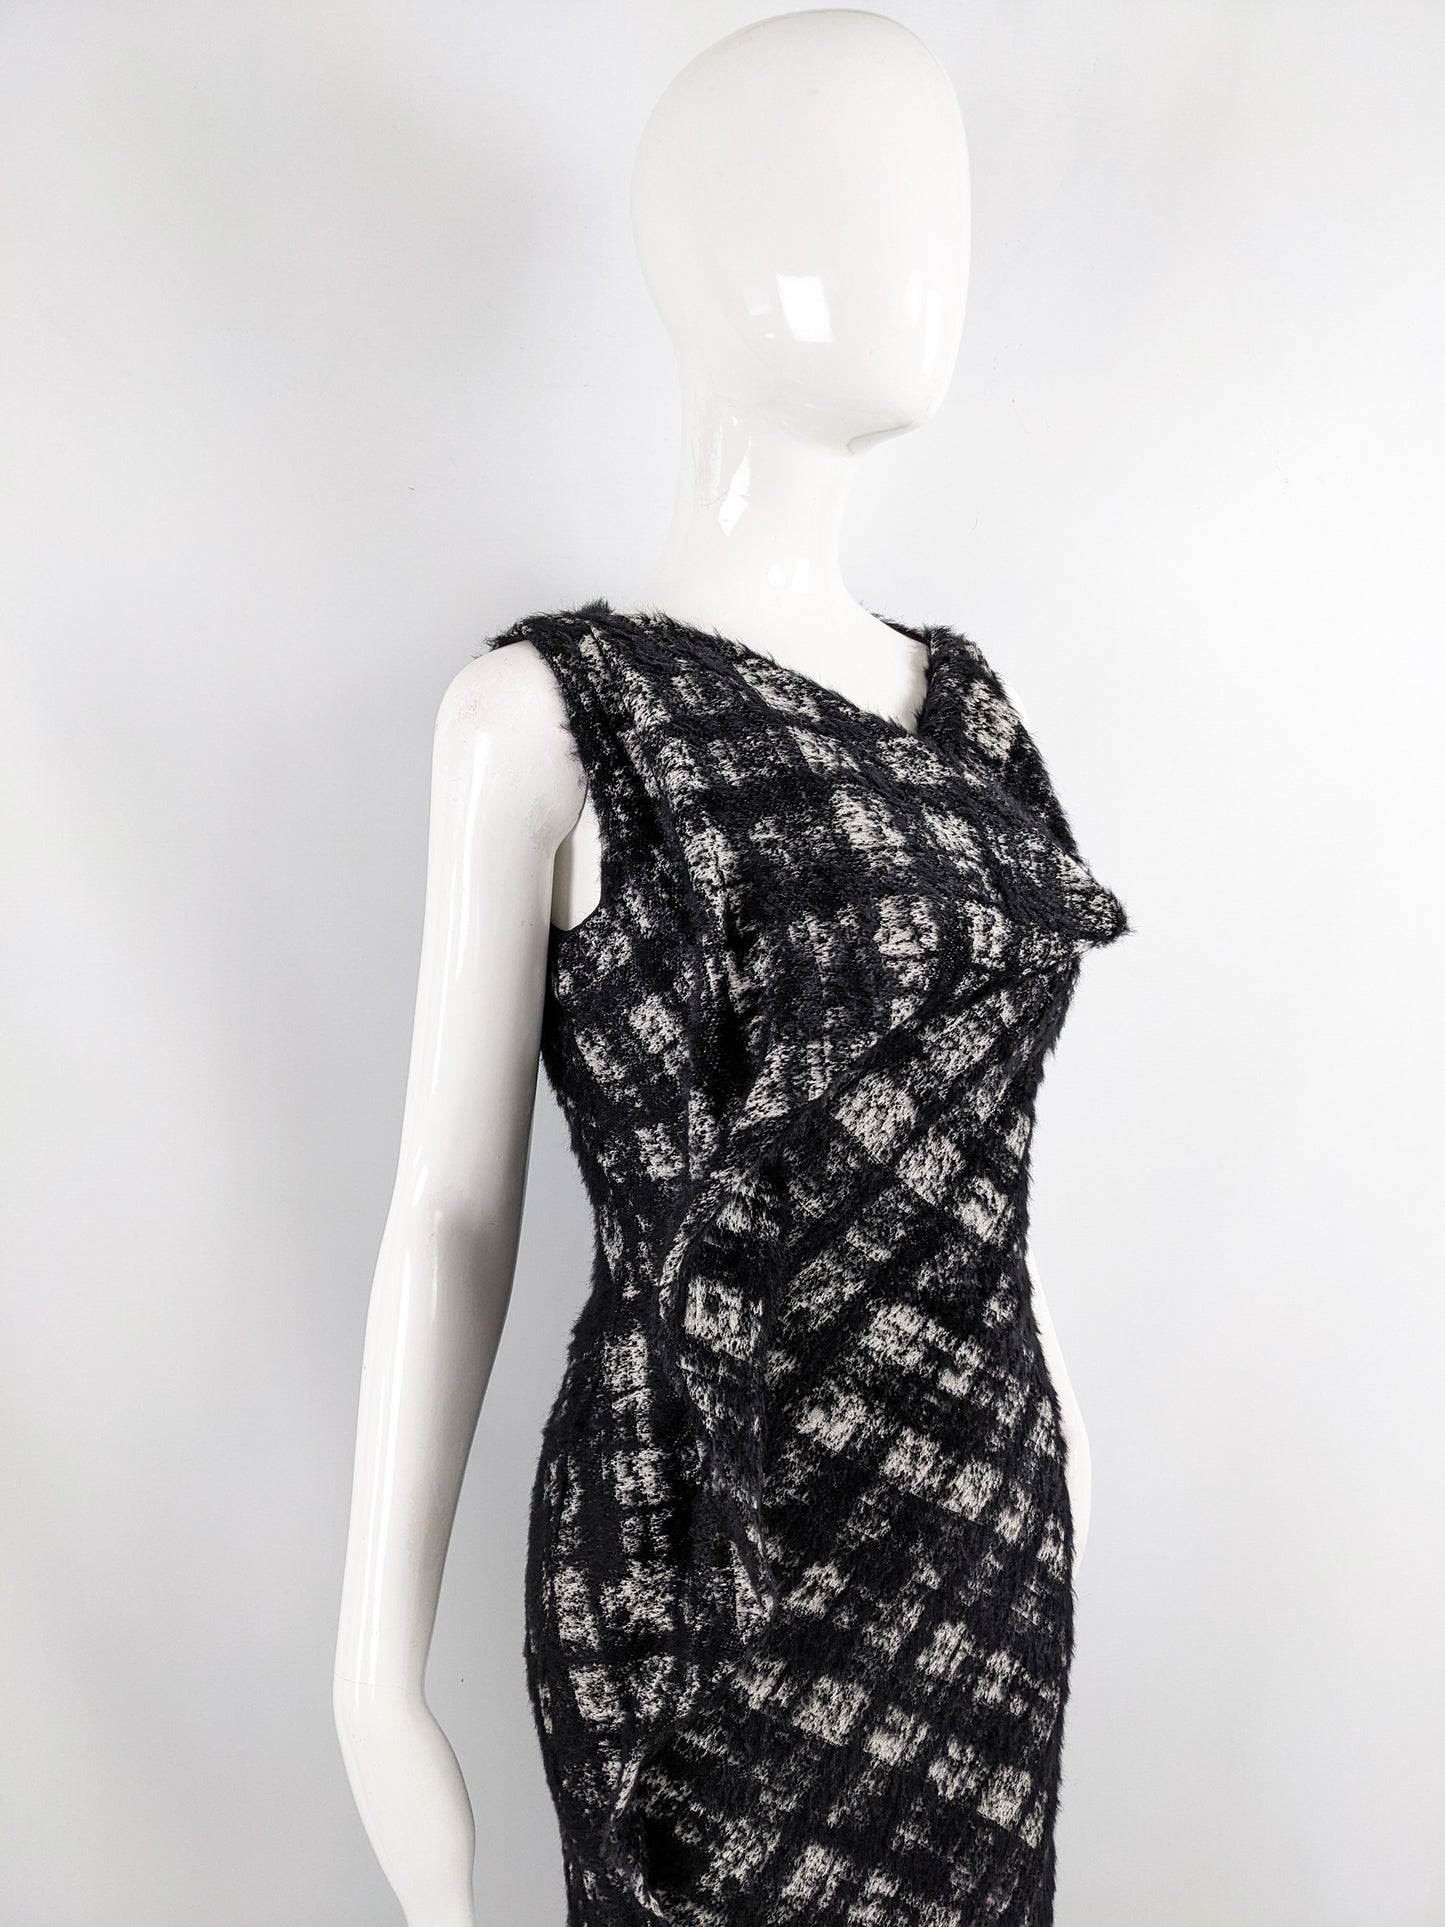 Plein Sud Vintage Black & White Checked Structural Party Dress, 1990s